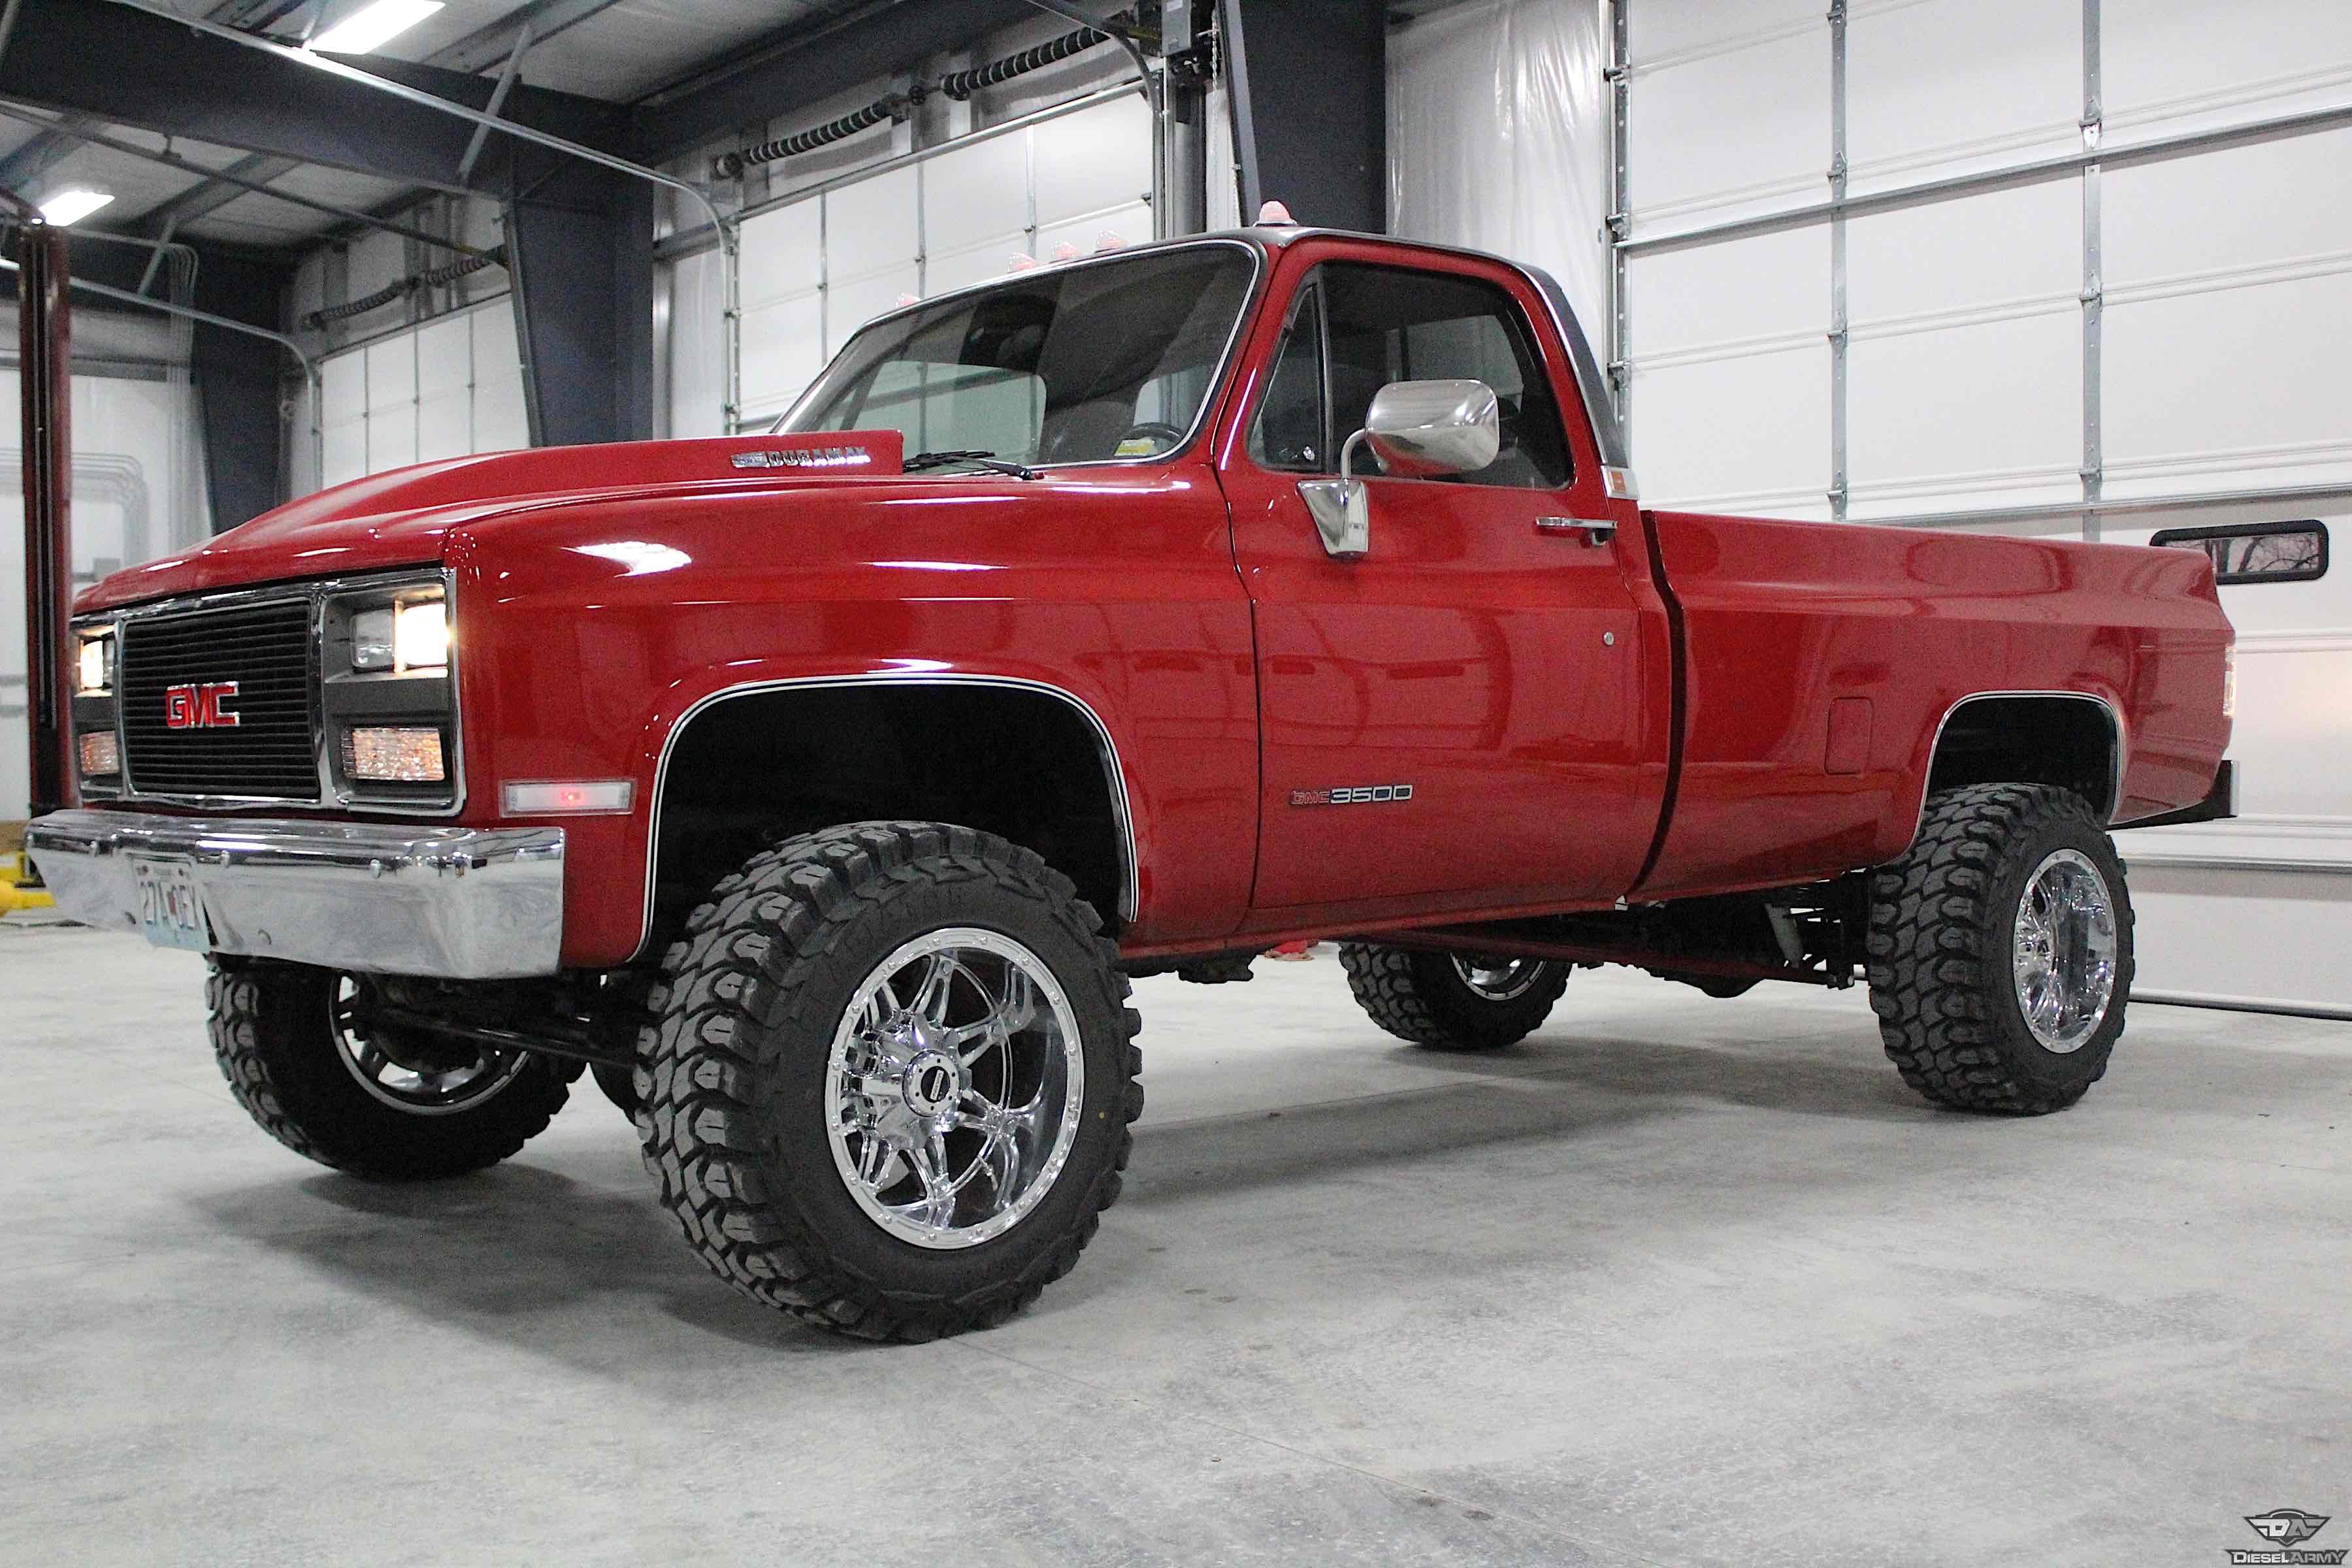 When people get wind of a clean "square body" it sparks massive i...